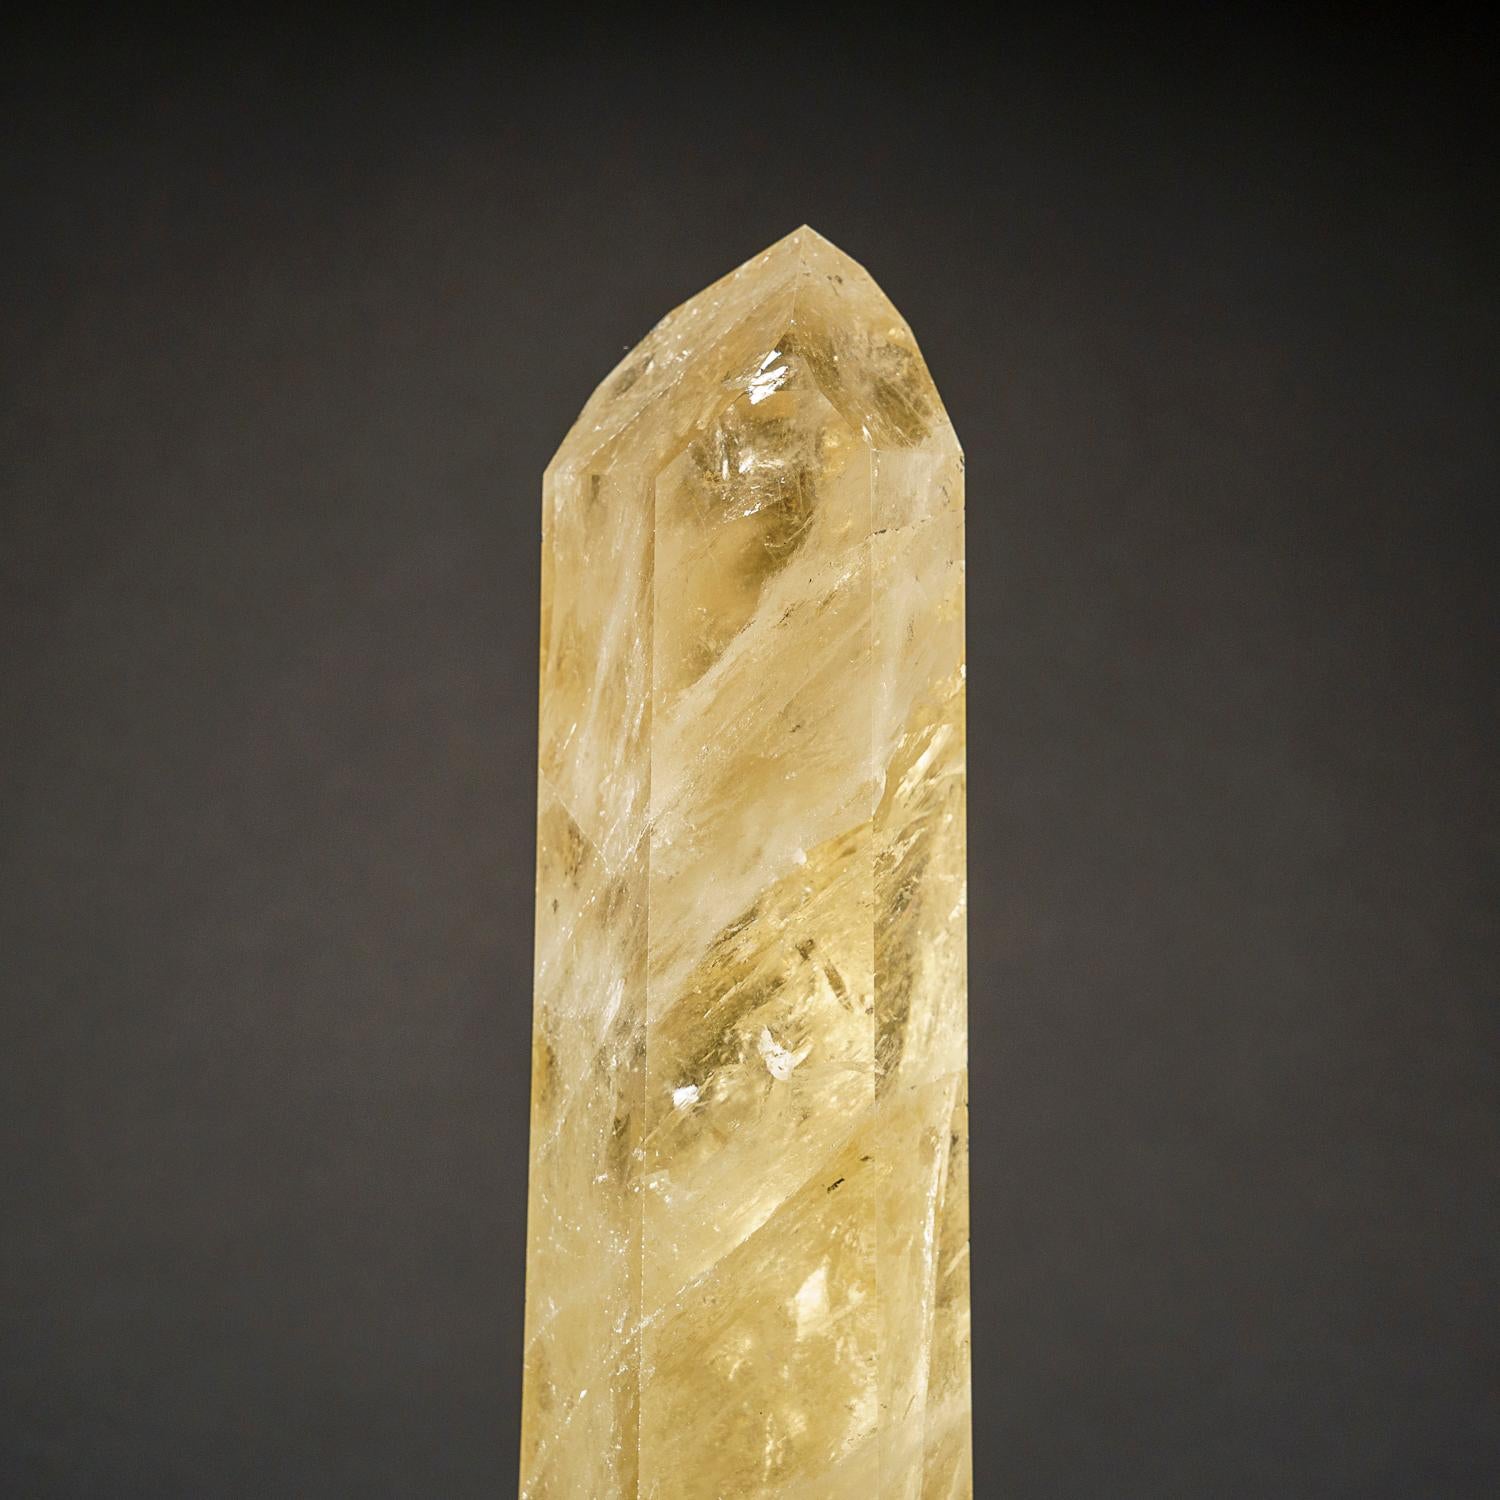 Museum-quality, large crystal of transparent Citrine quartz point with rutile inclusions. This world-class point is extremely large, with top luster and excellent natural smoky yellow color, internally this crystal is flawless.

Citrine can activate